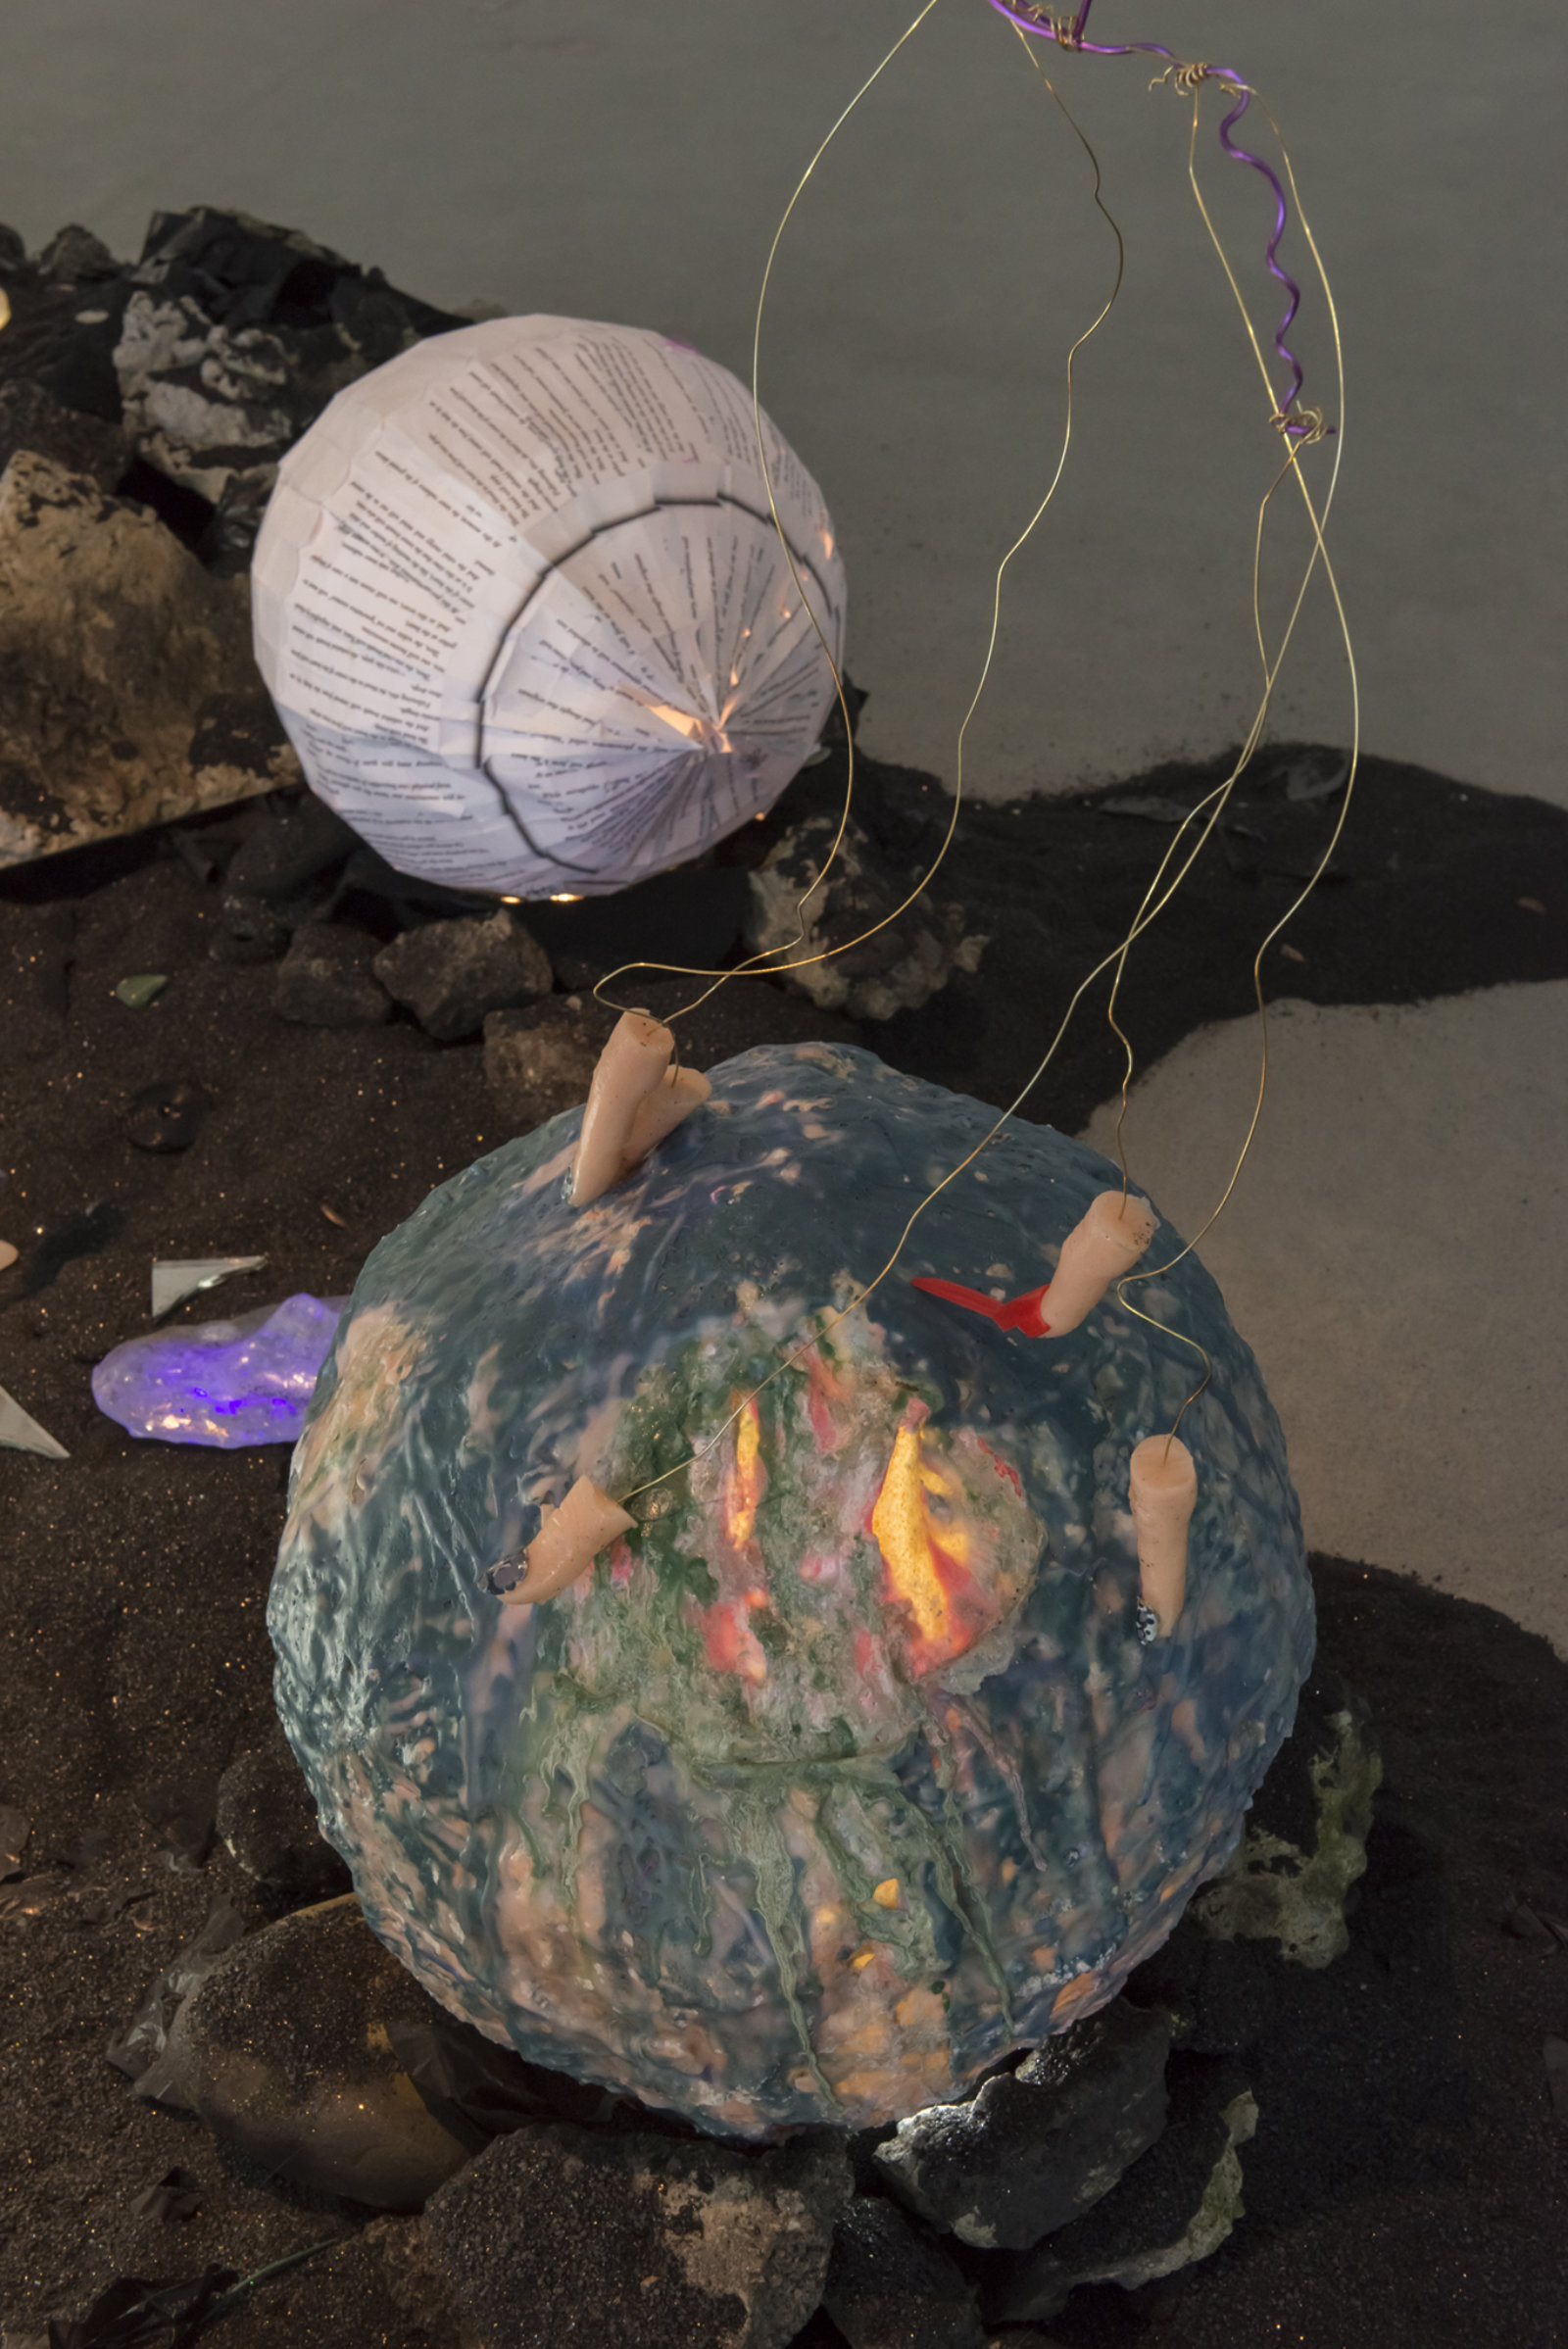 Kasper Feyrer, Device for sensing habitable zones (detail), 2018, copper slag, latex, wax, worbla, paper, fur, feather, amaranth seed, plaster, gelatin, gummies, globe, rat toy, hay, dried weeds, silicone, wire mesh, coins, mineral rocks, fused glass faces, rocks, concrete, motor, 136 x 109 x 108 in. (354 x 277 x 274 cm)